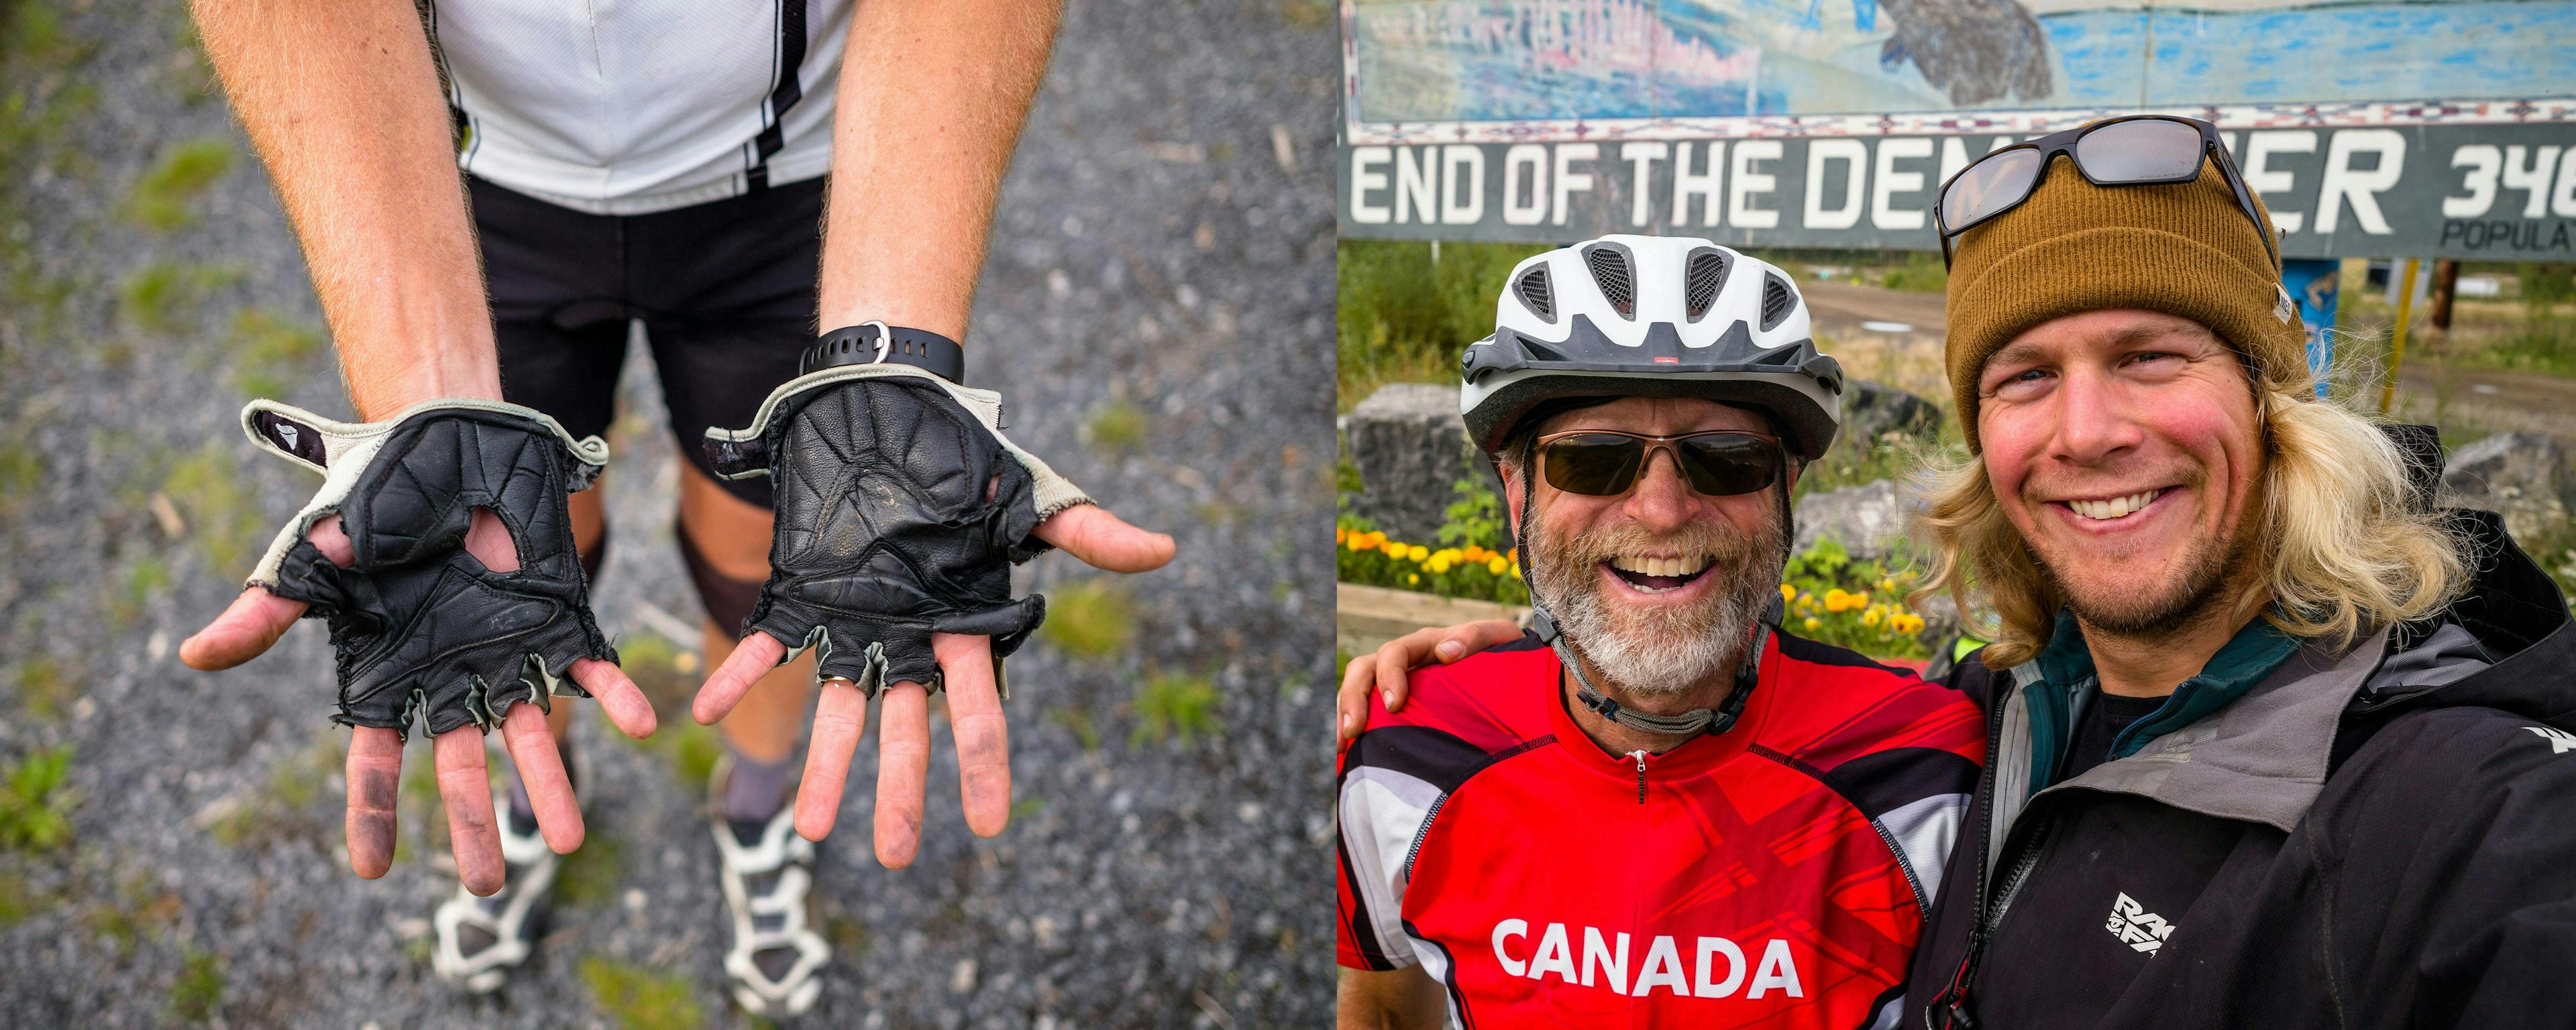 Worn-out bike gloves, and portrait of Reuben and his dad